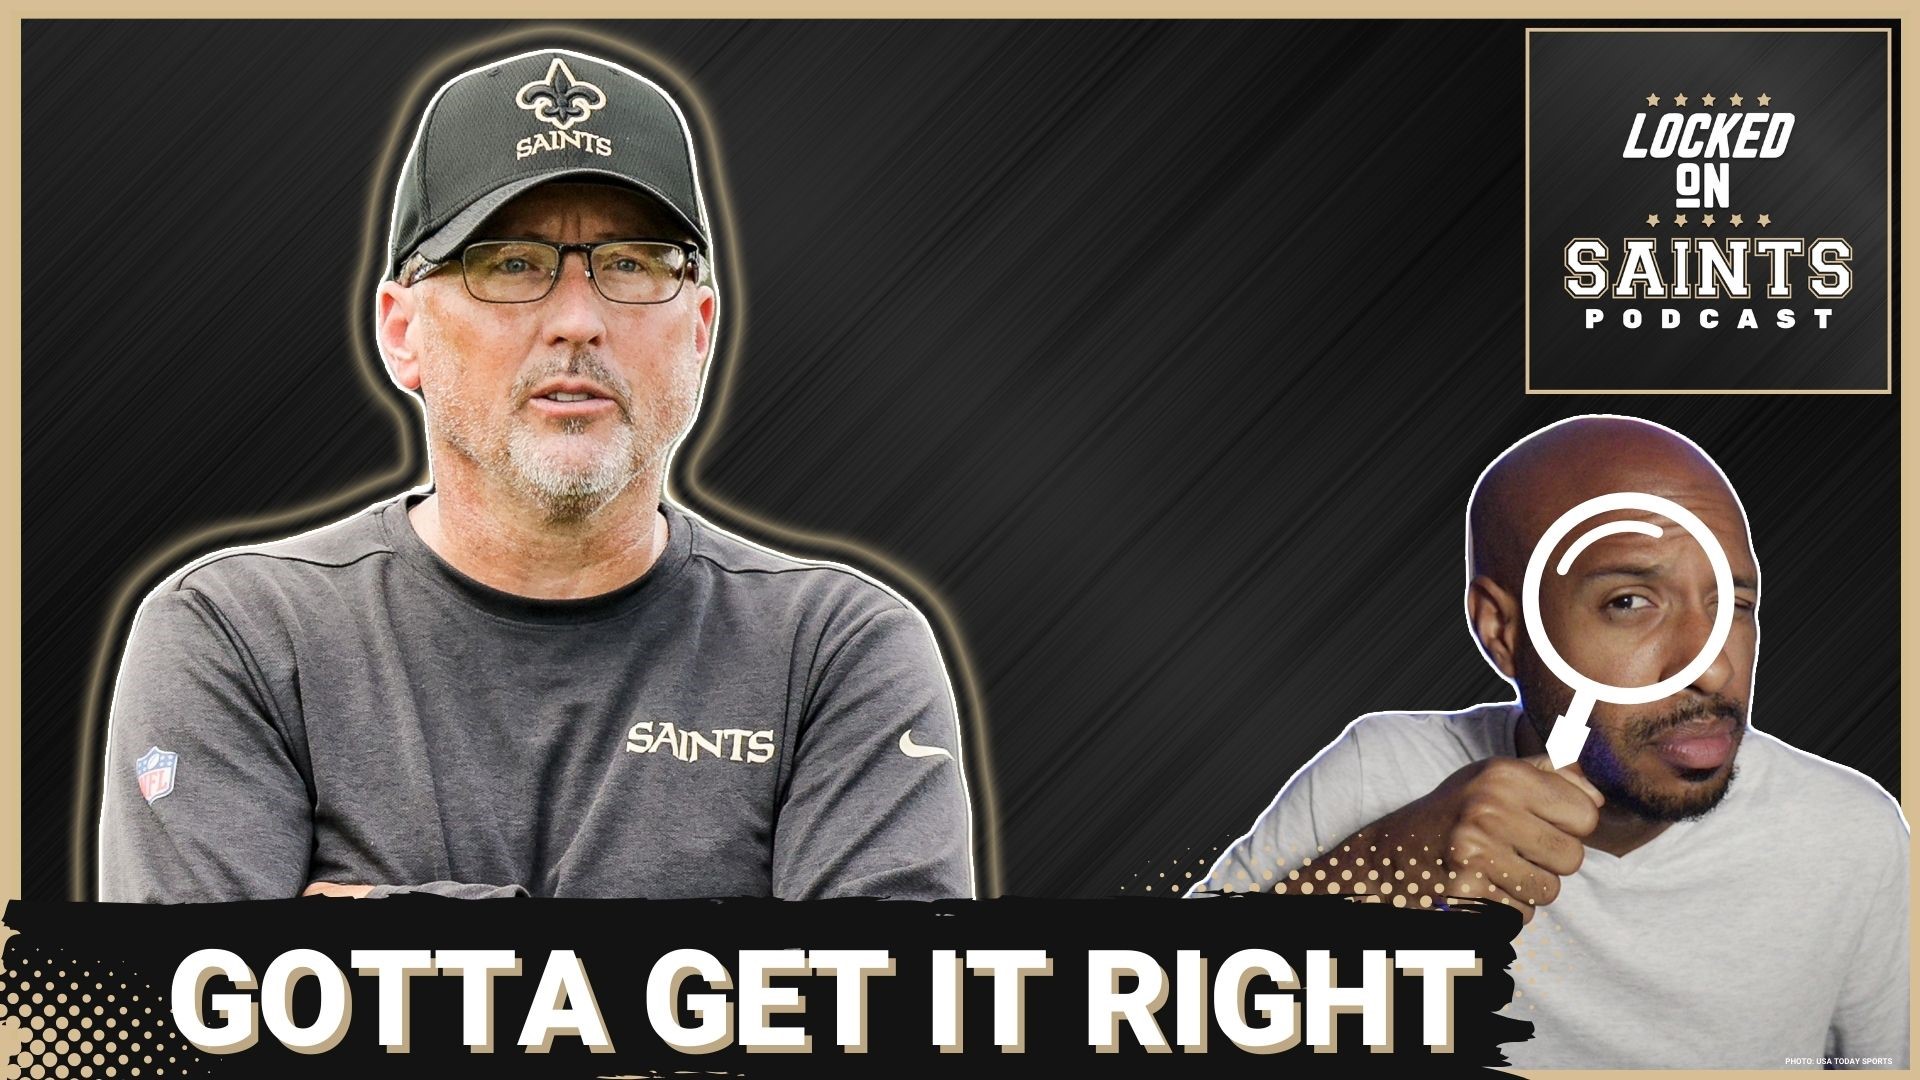 The New Orleans Saints have made improvements this offseason with the additions of Derek Carr, Jamaal Williams and others. But Peter Carmichael is the key to success